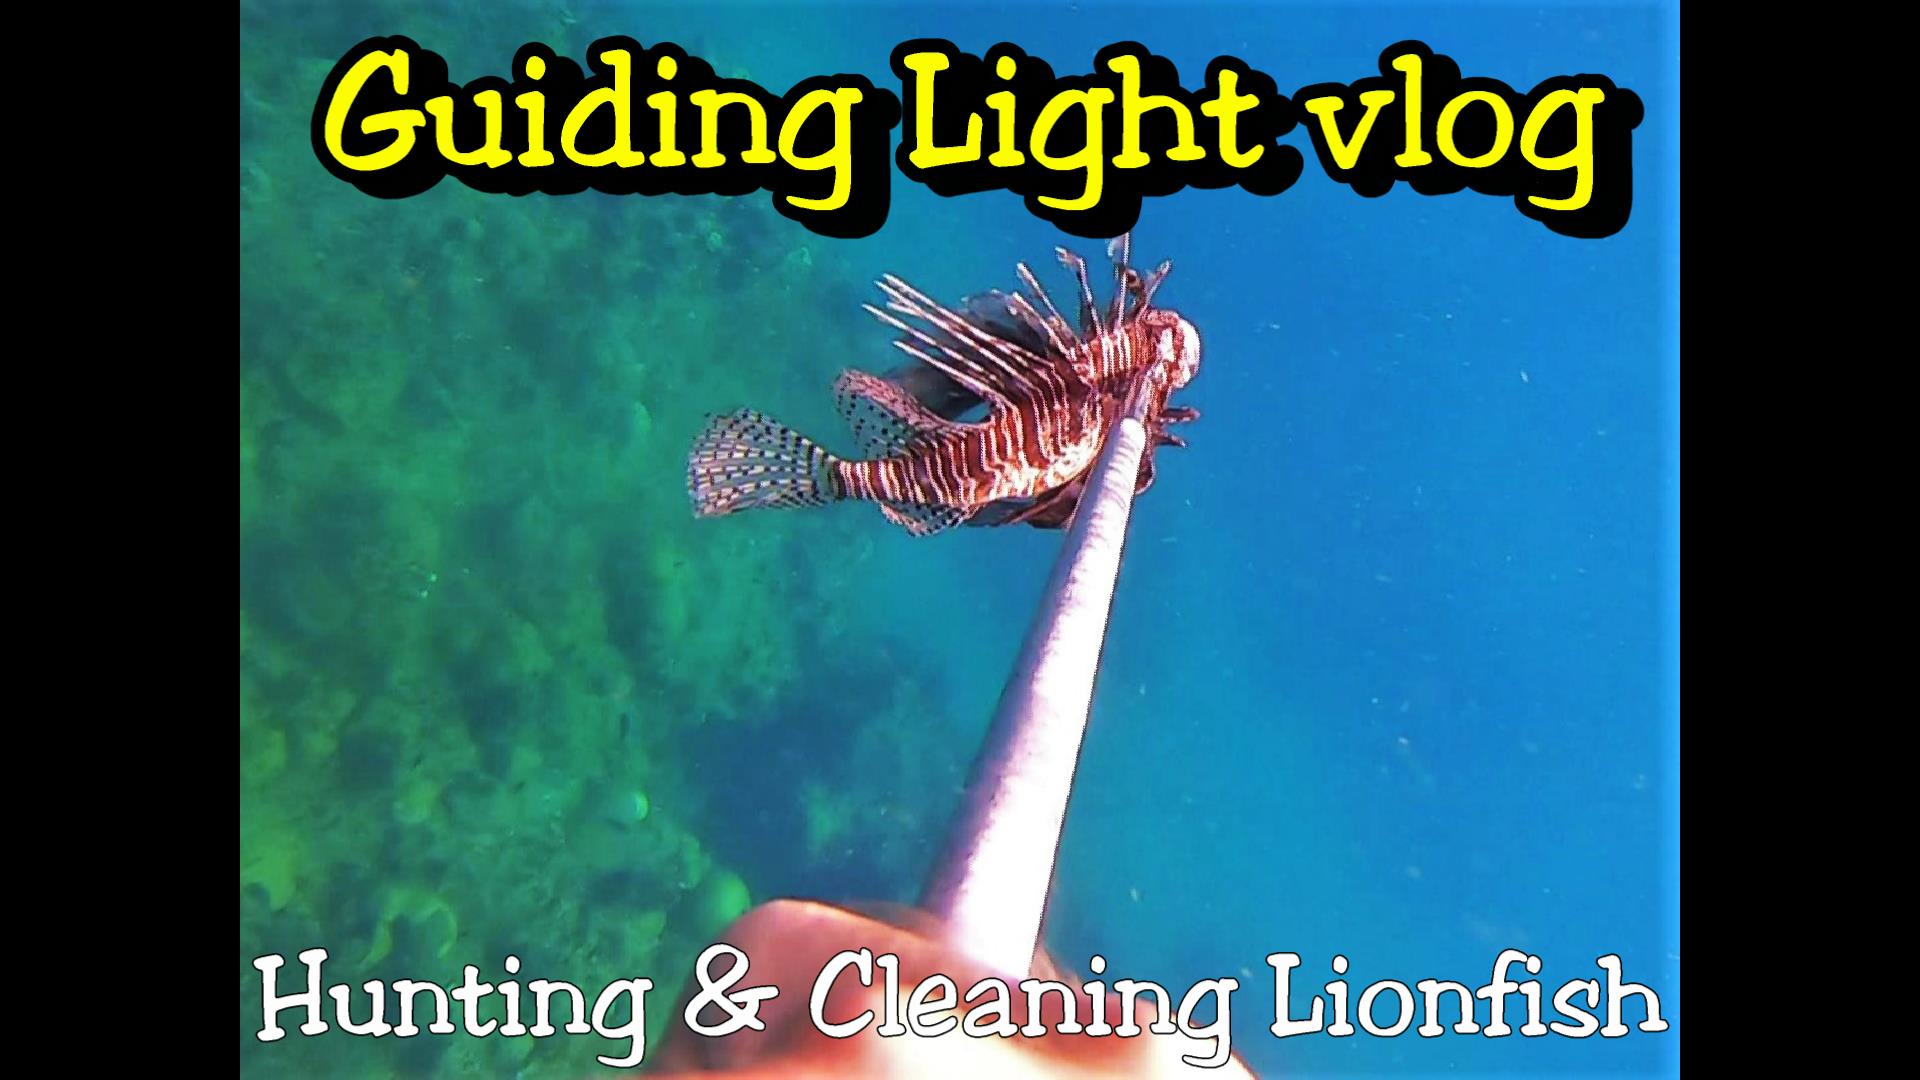 Another lionfish hunting video is now available